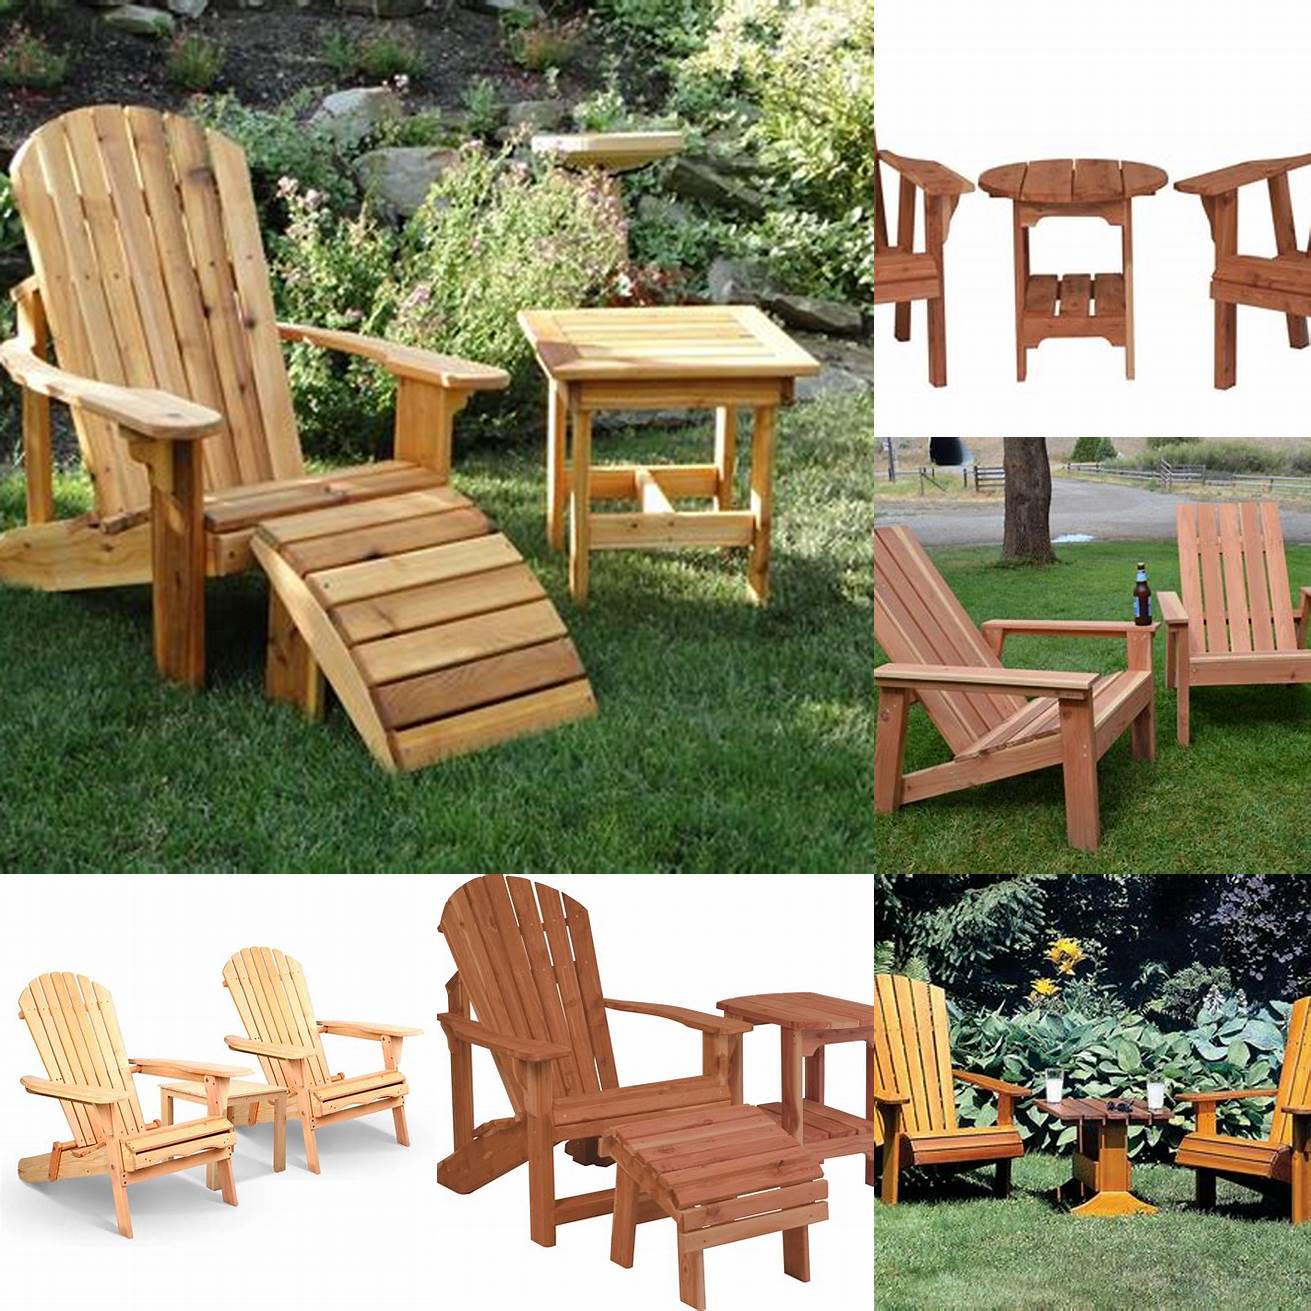 Wooden adirondack chairs with side table